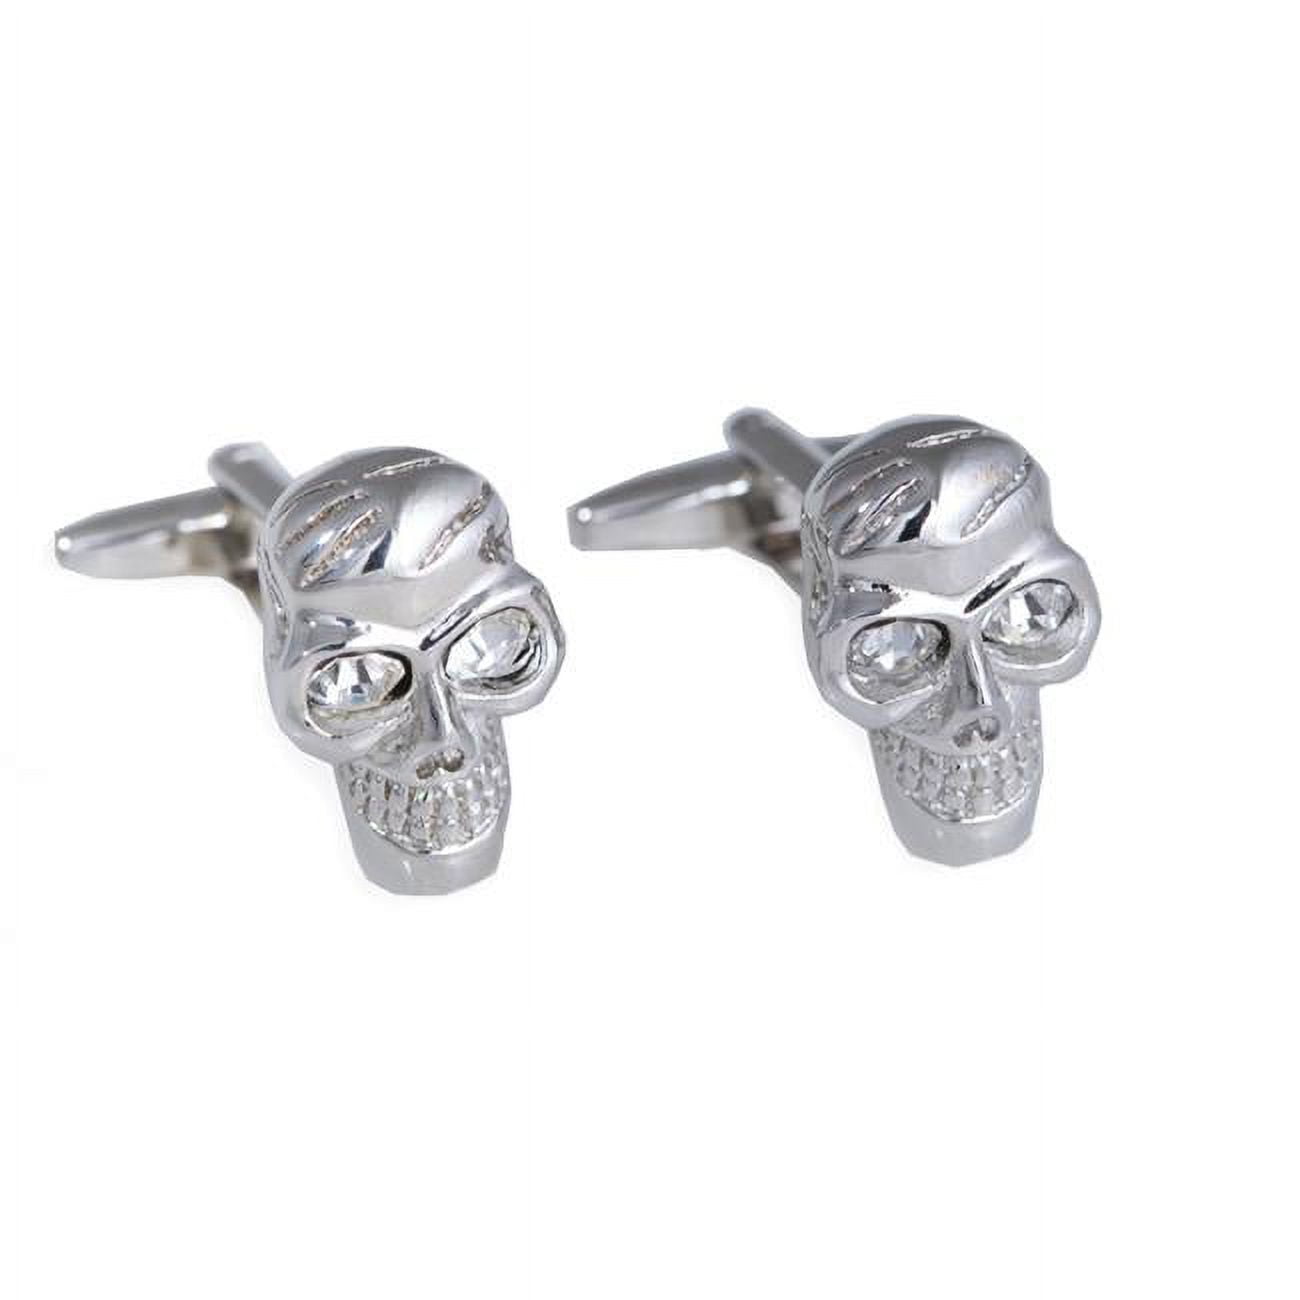 Picture of Bey-Berk International J180 Rhodium Plated Scull Design Cufflink with Crystal Accents - Silver